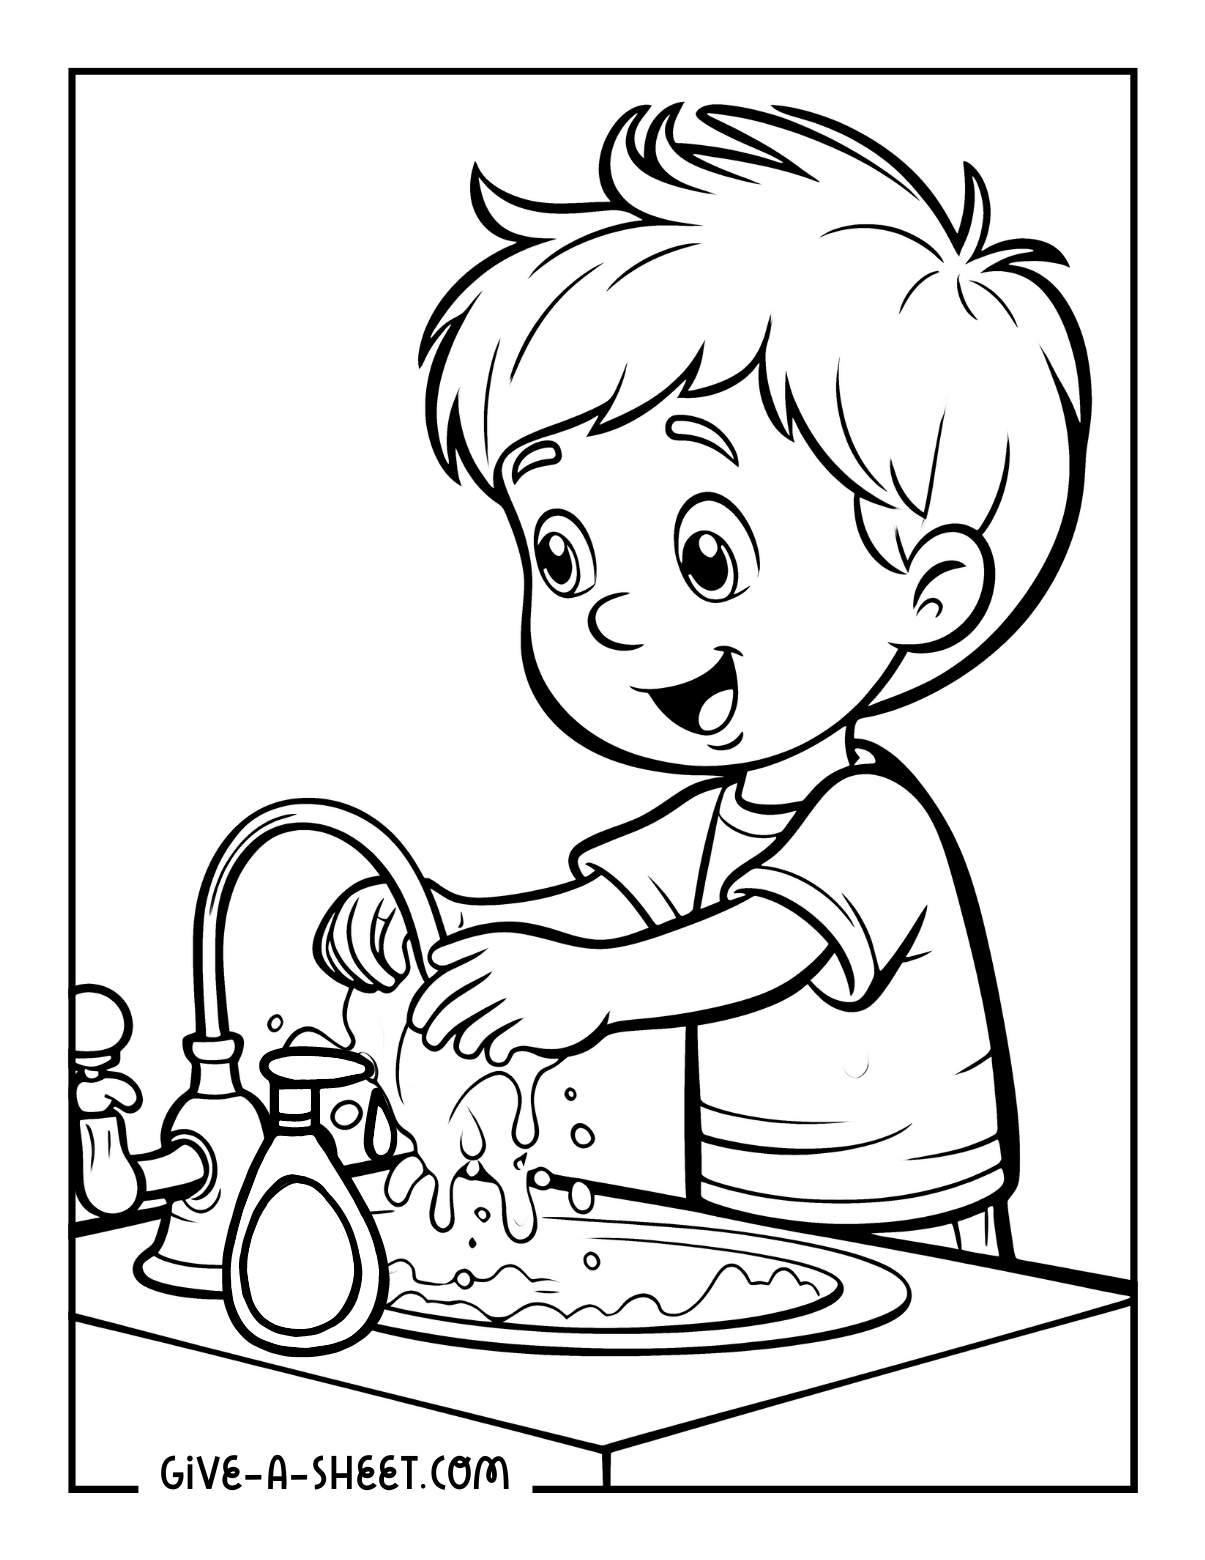 Fun way to wash hands coloring page for kids.